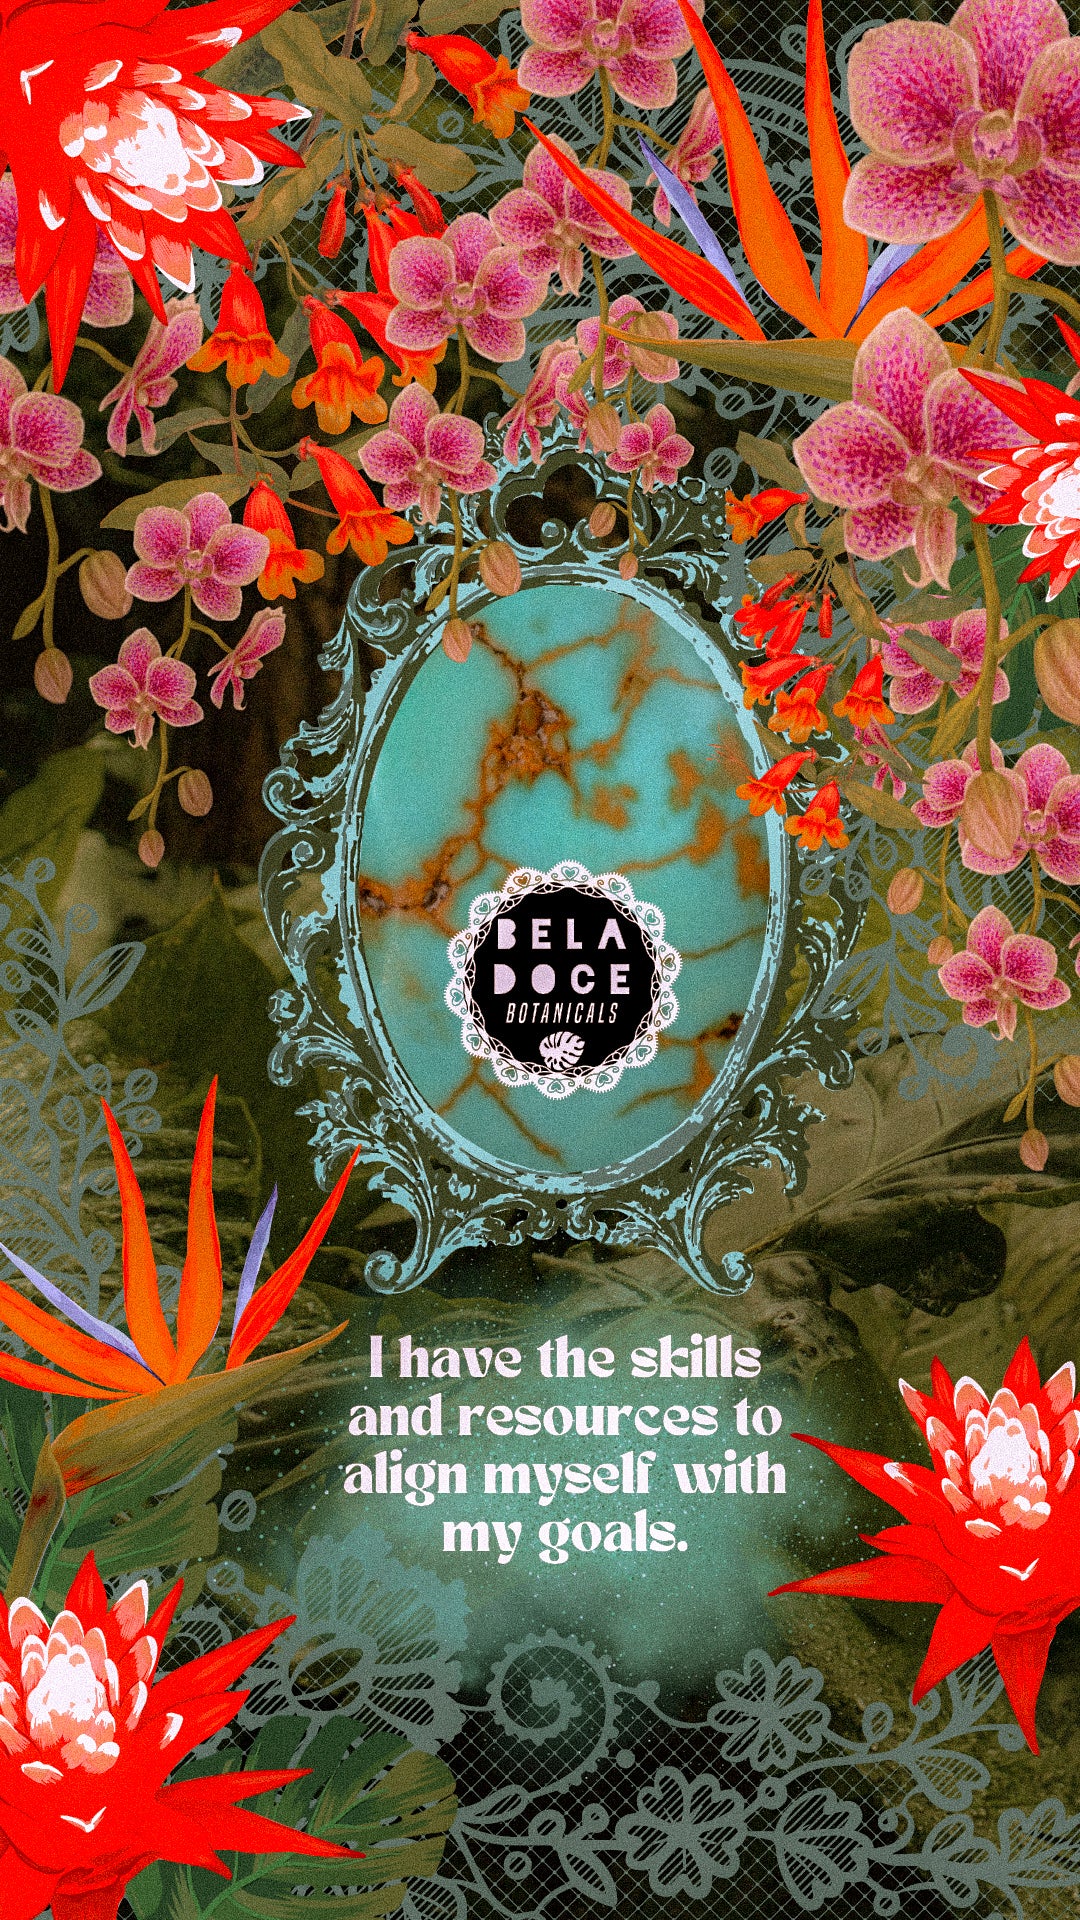 Beladoce Botanicals®️ turquoise and emerald green aesthetic collage of tropical landscape with painted orchid and bromeliad flowers. Silver and teal antique style frame around text. Text reads: “I am surrounded by abundance. I have everything I need to reach my goals.”